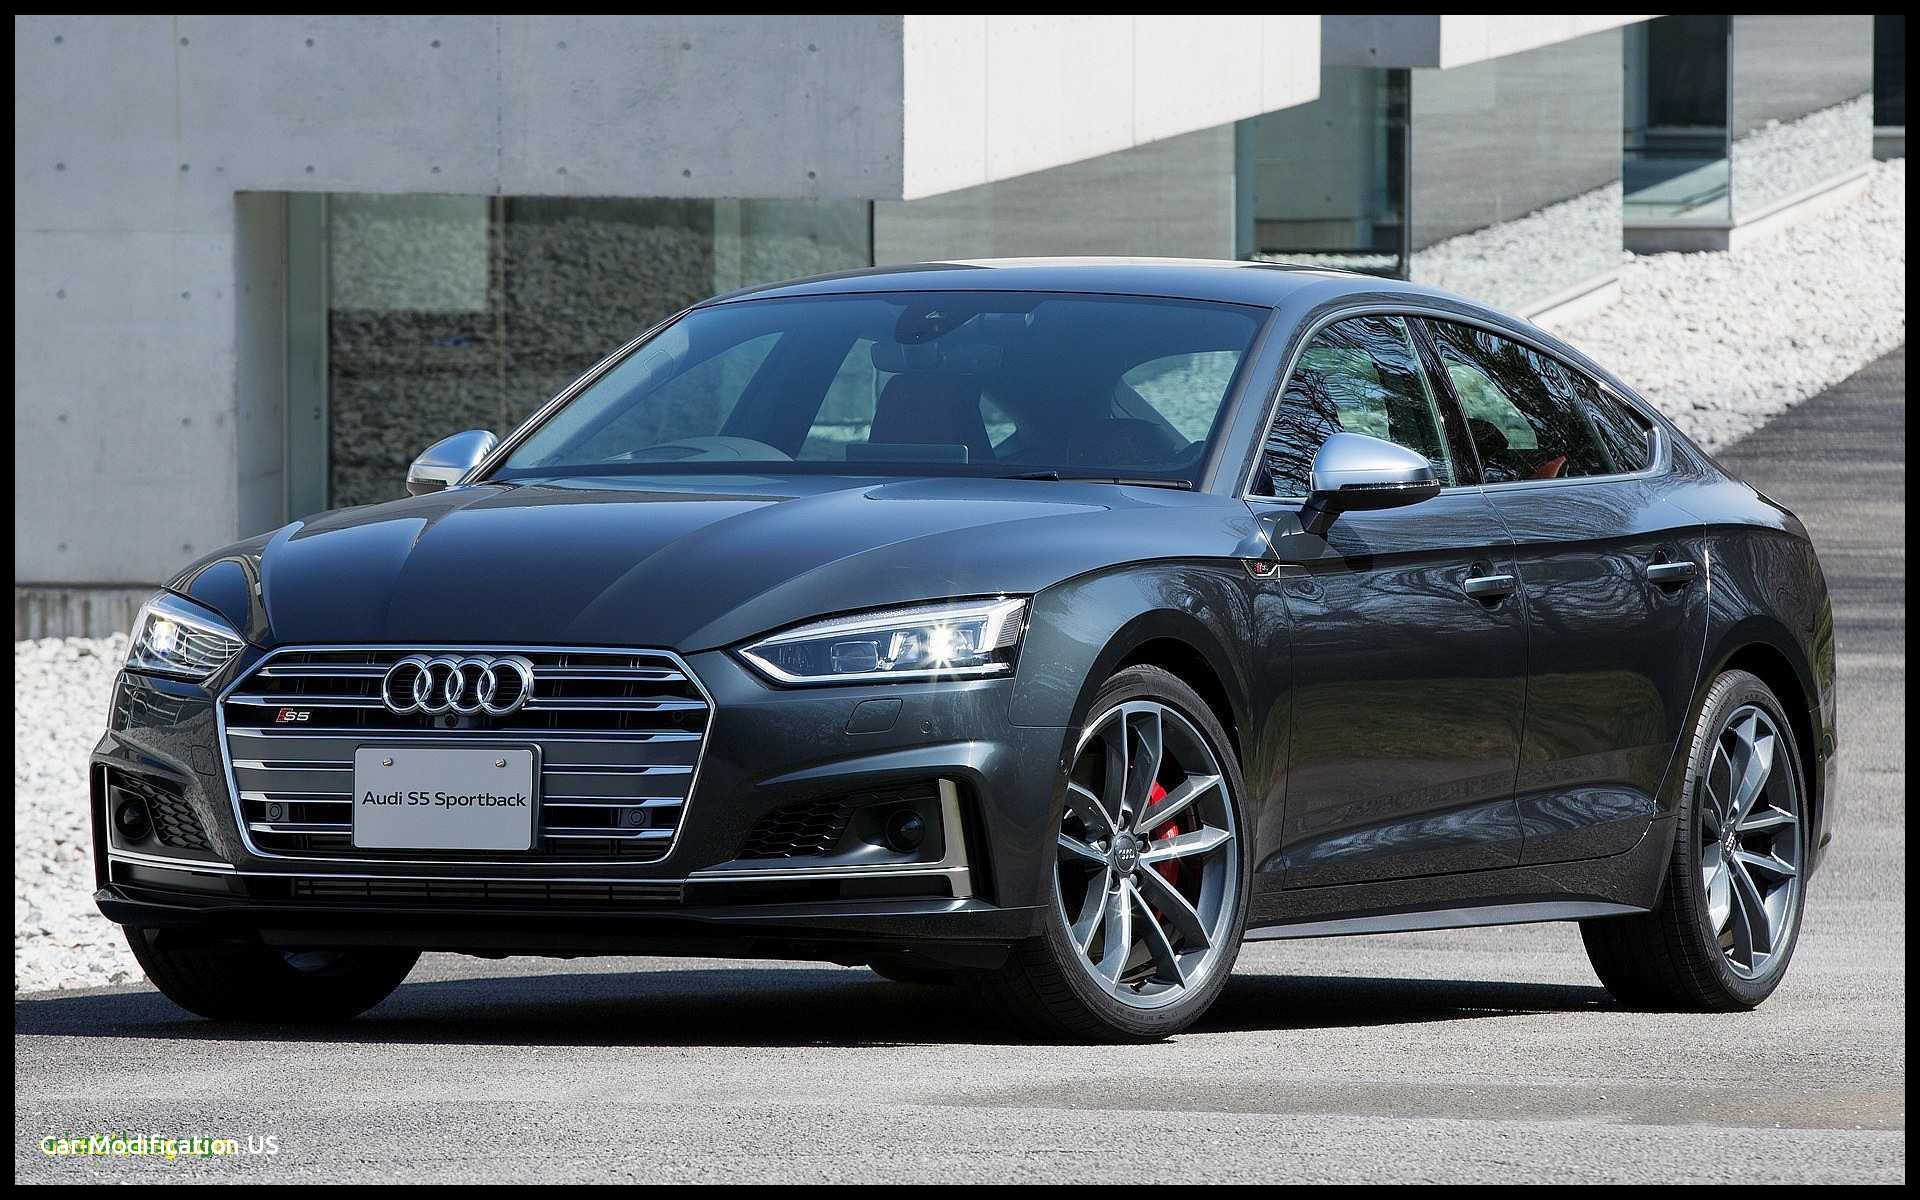 Used Audi for Sale In India Fresh Used Audi Cars for Sale Lovely Used 2013 Audi